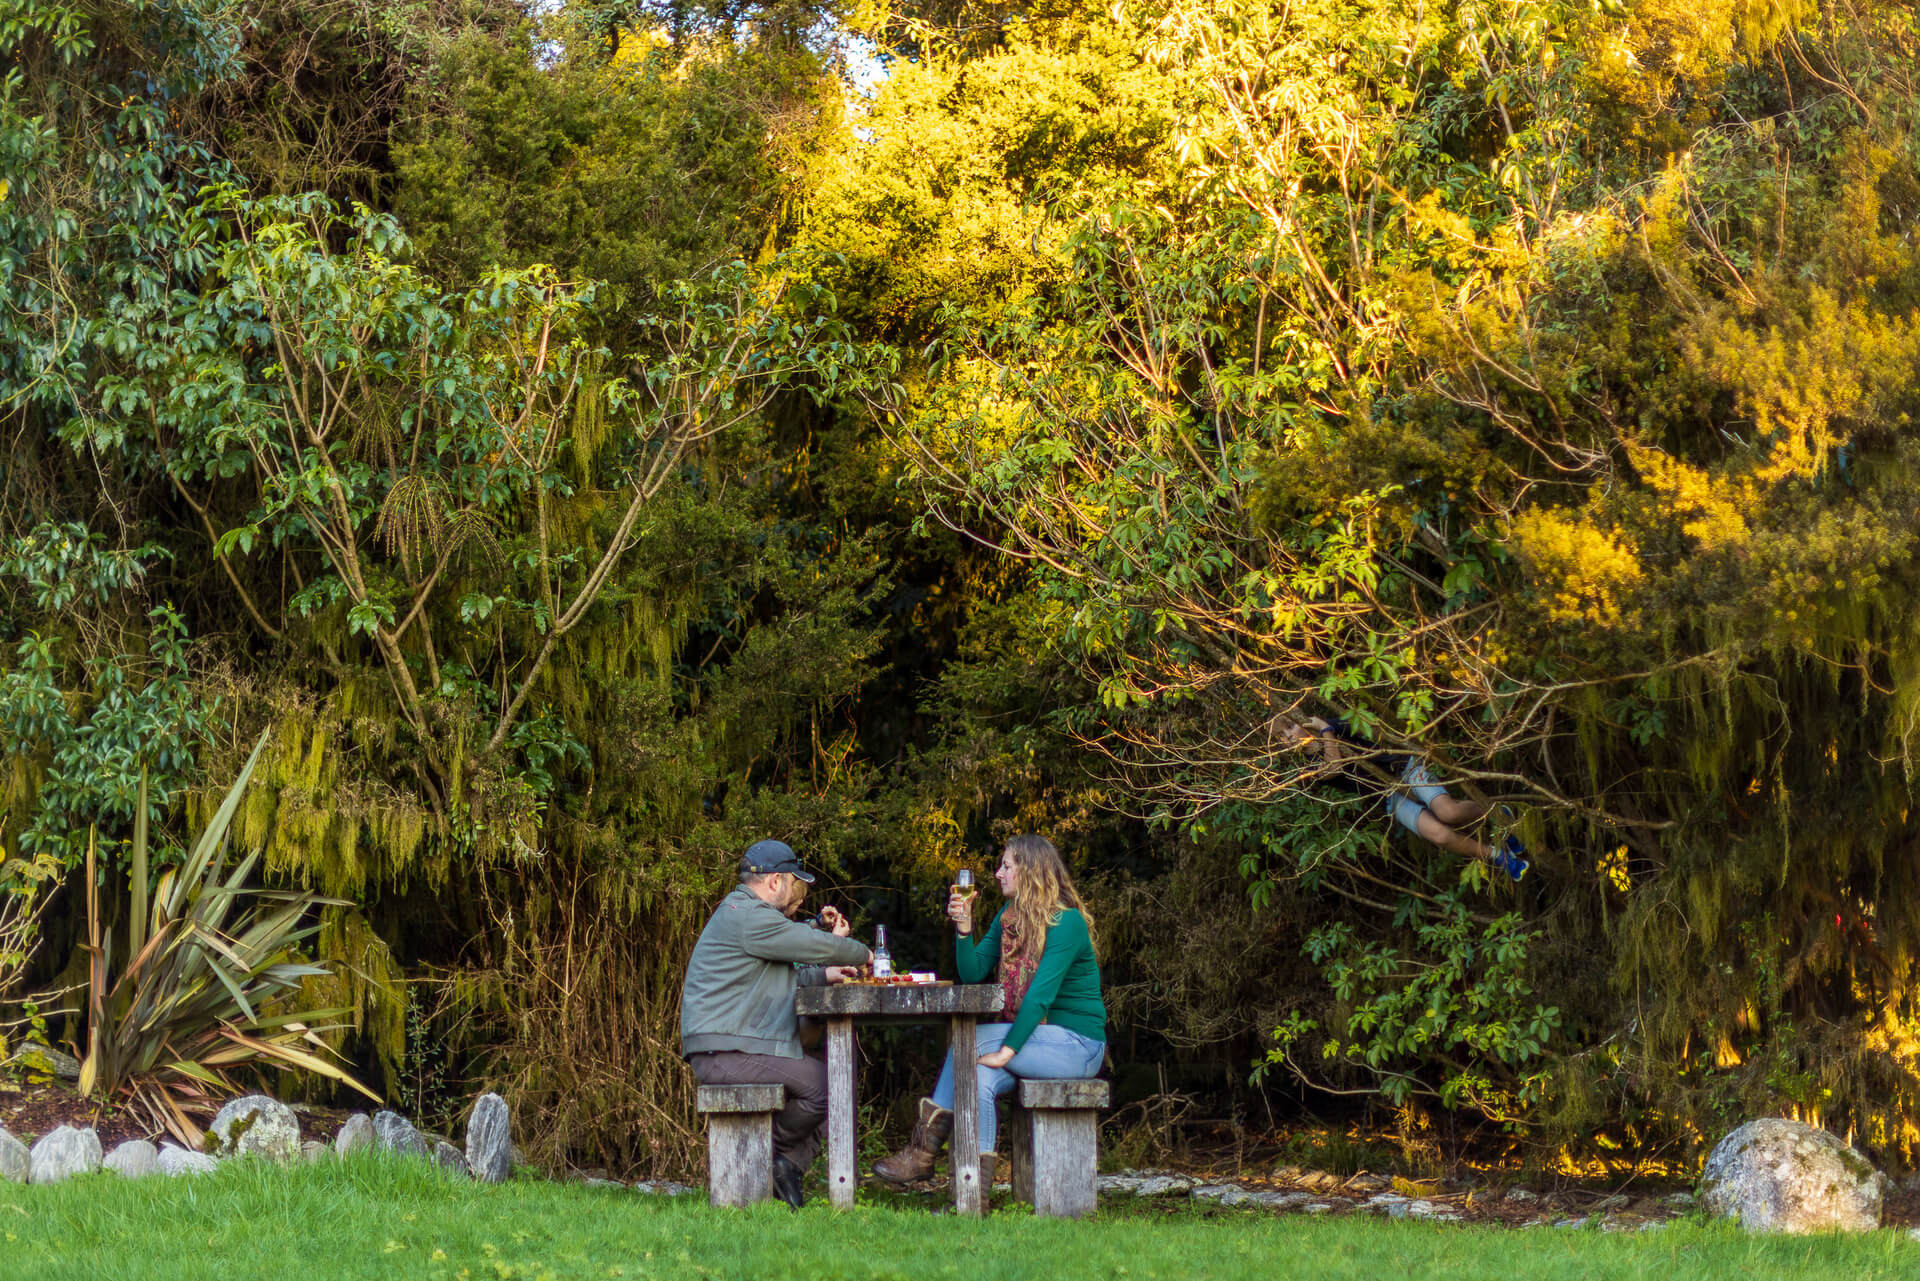 Guests sitting at table enjoying a meal surrounded by trees